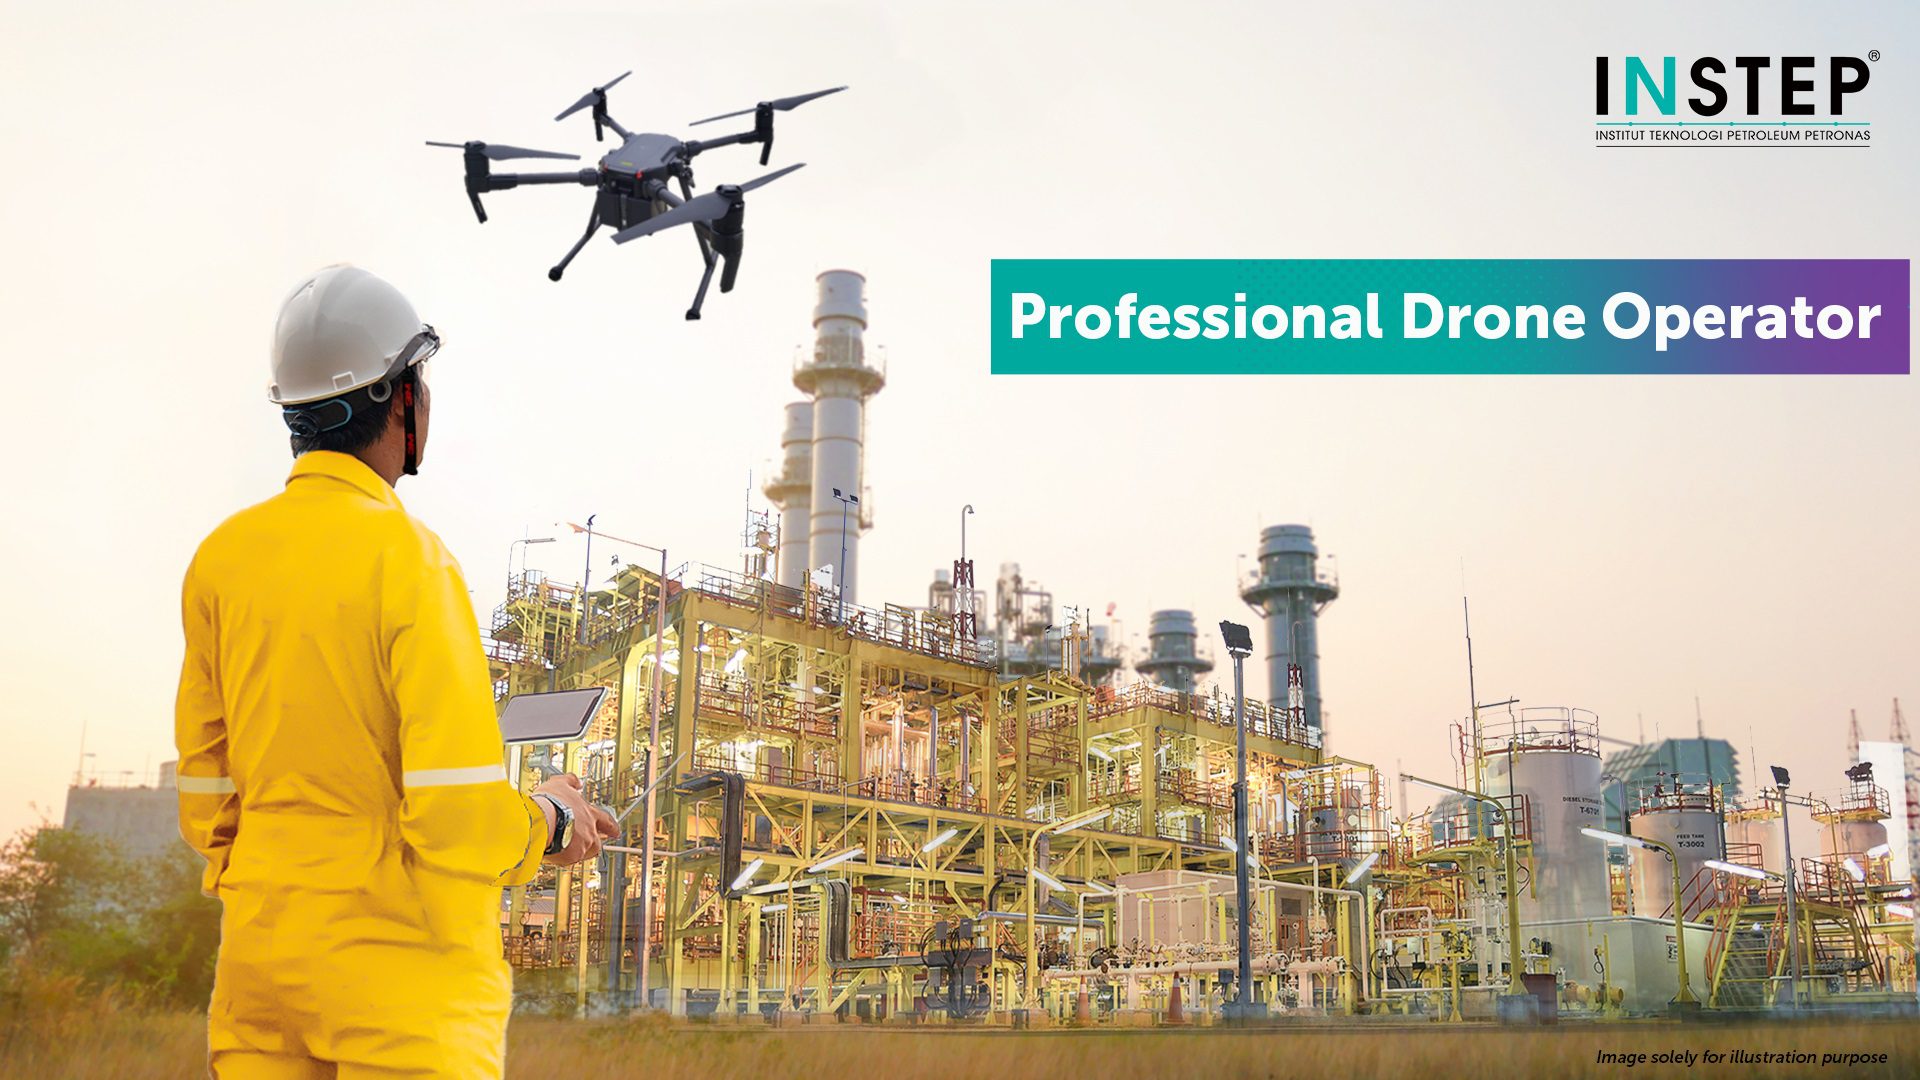 [NEW] A 3-day Professional Drone Operator Training Programme